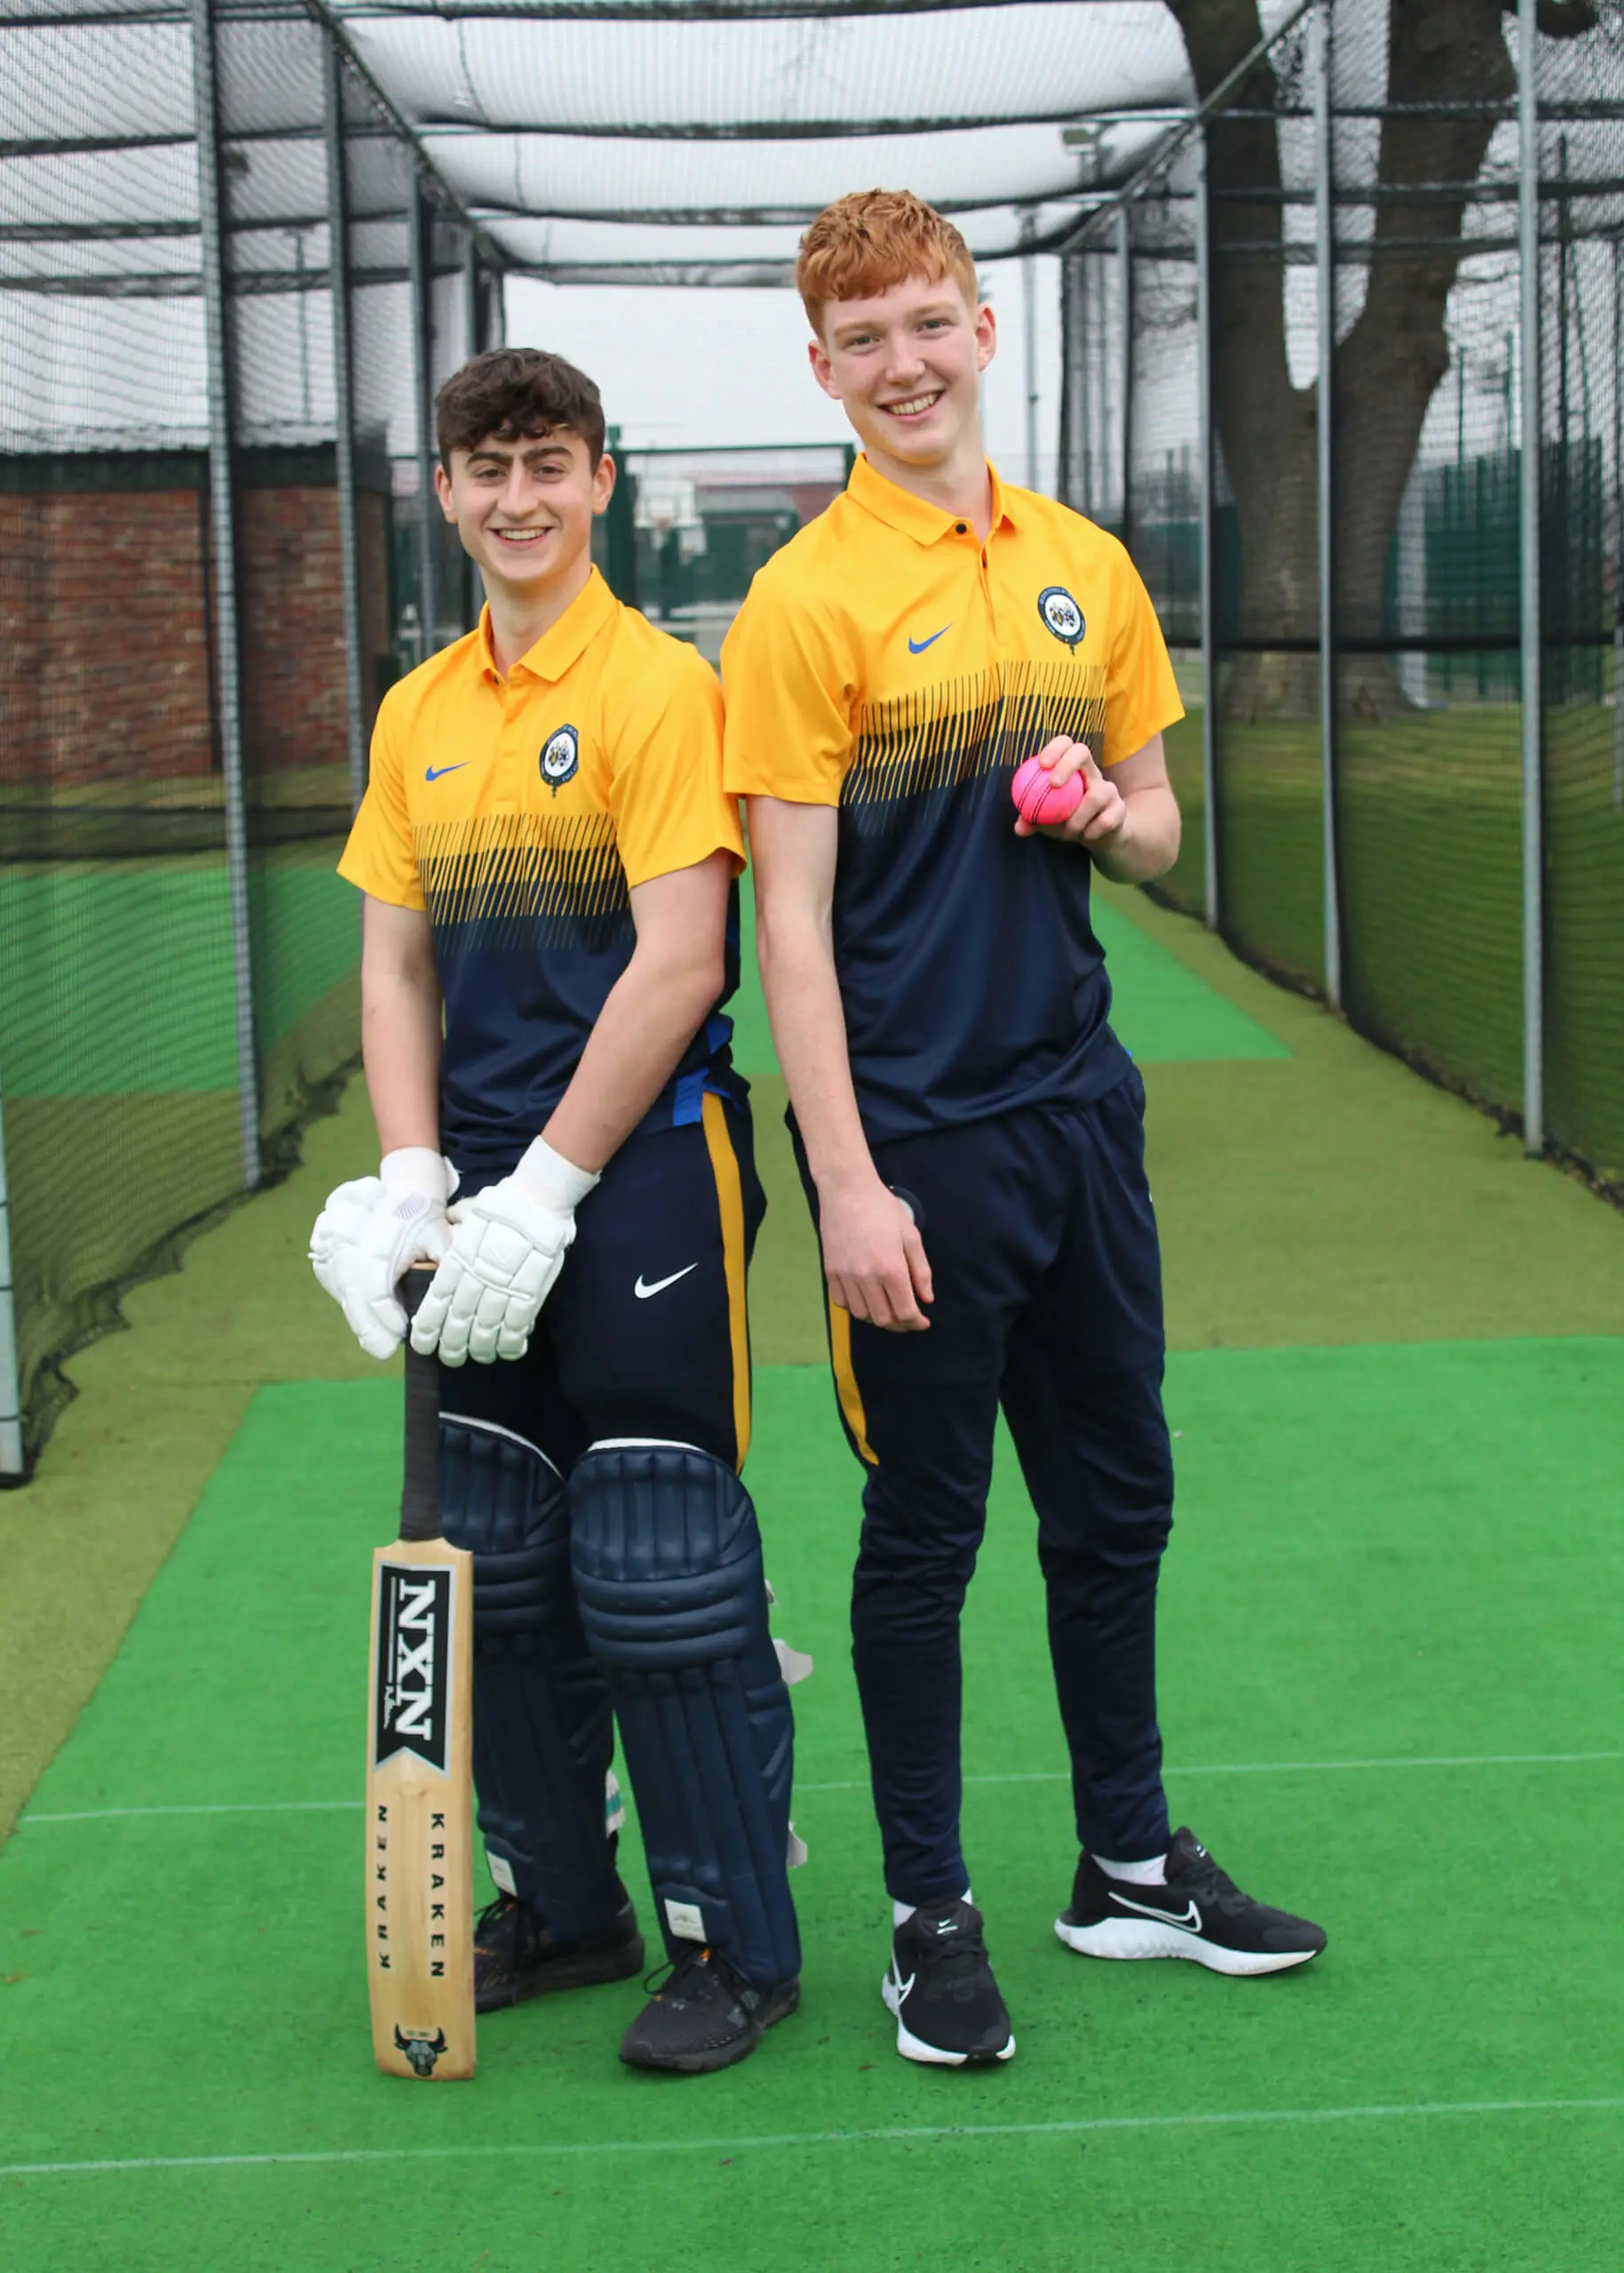 Students in the cricket nets at QE